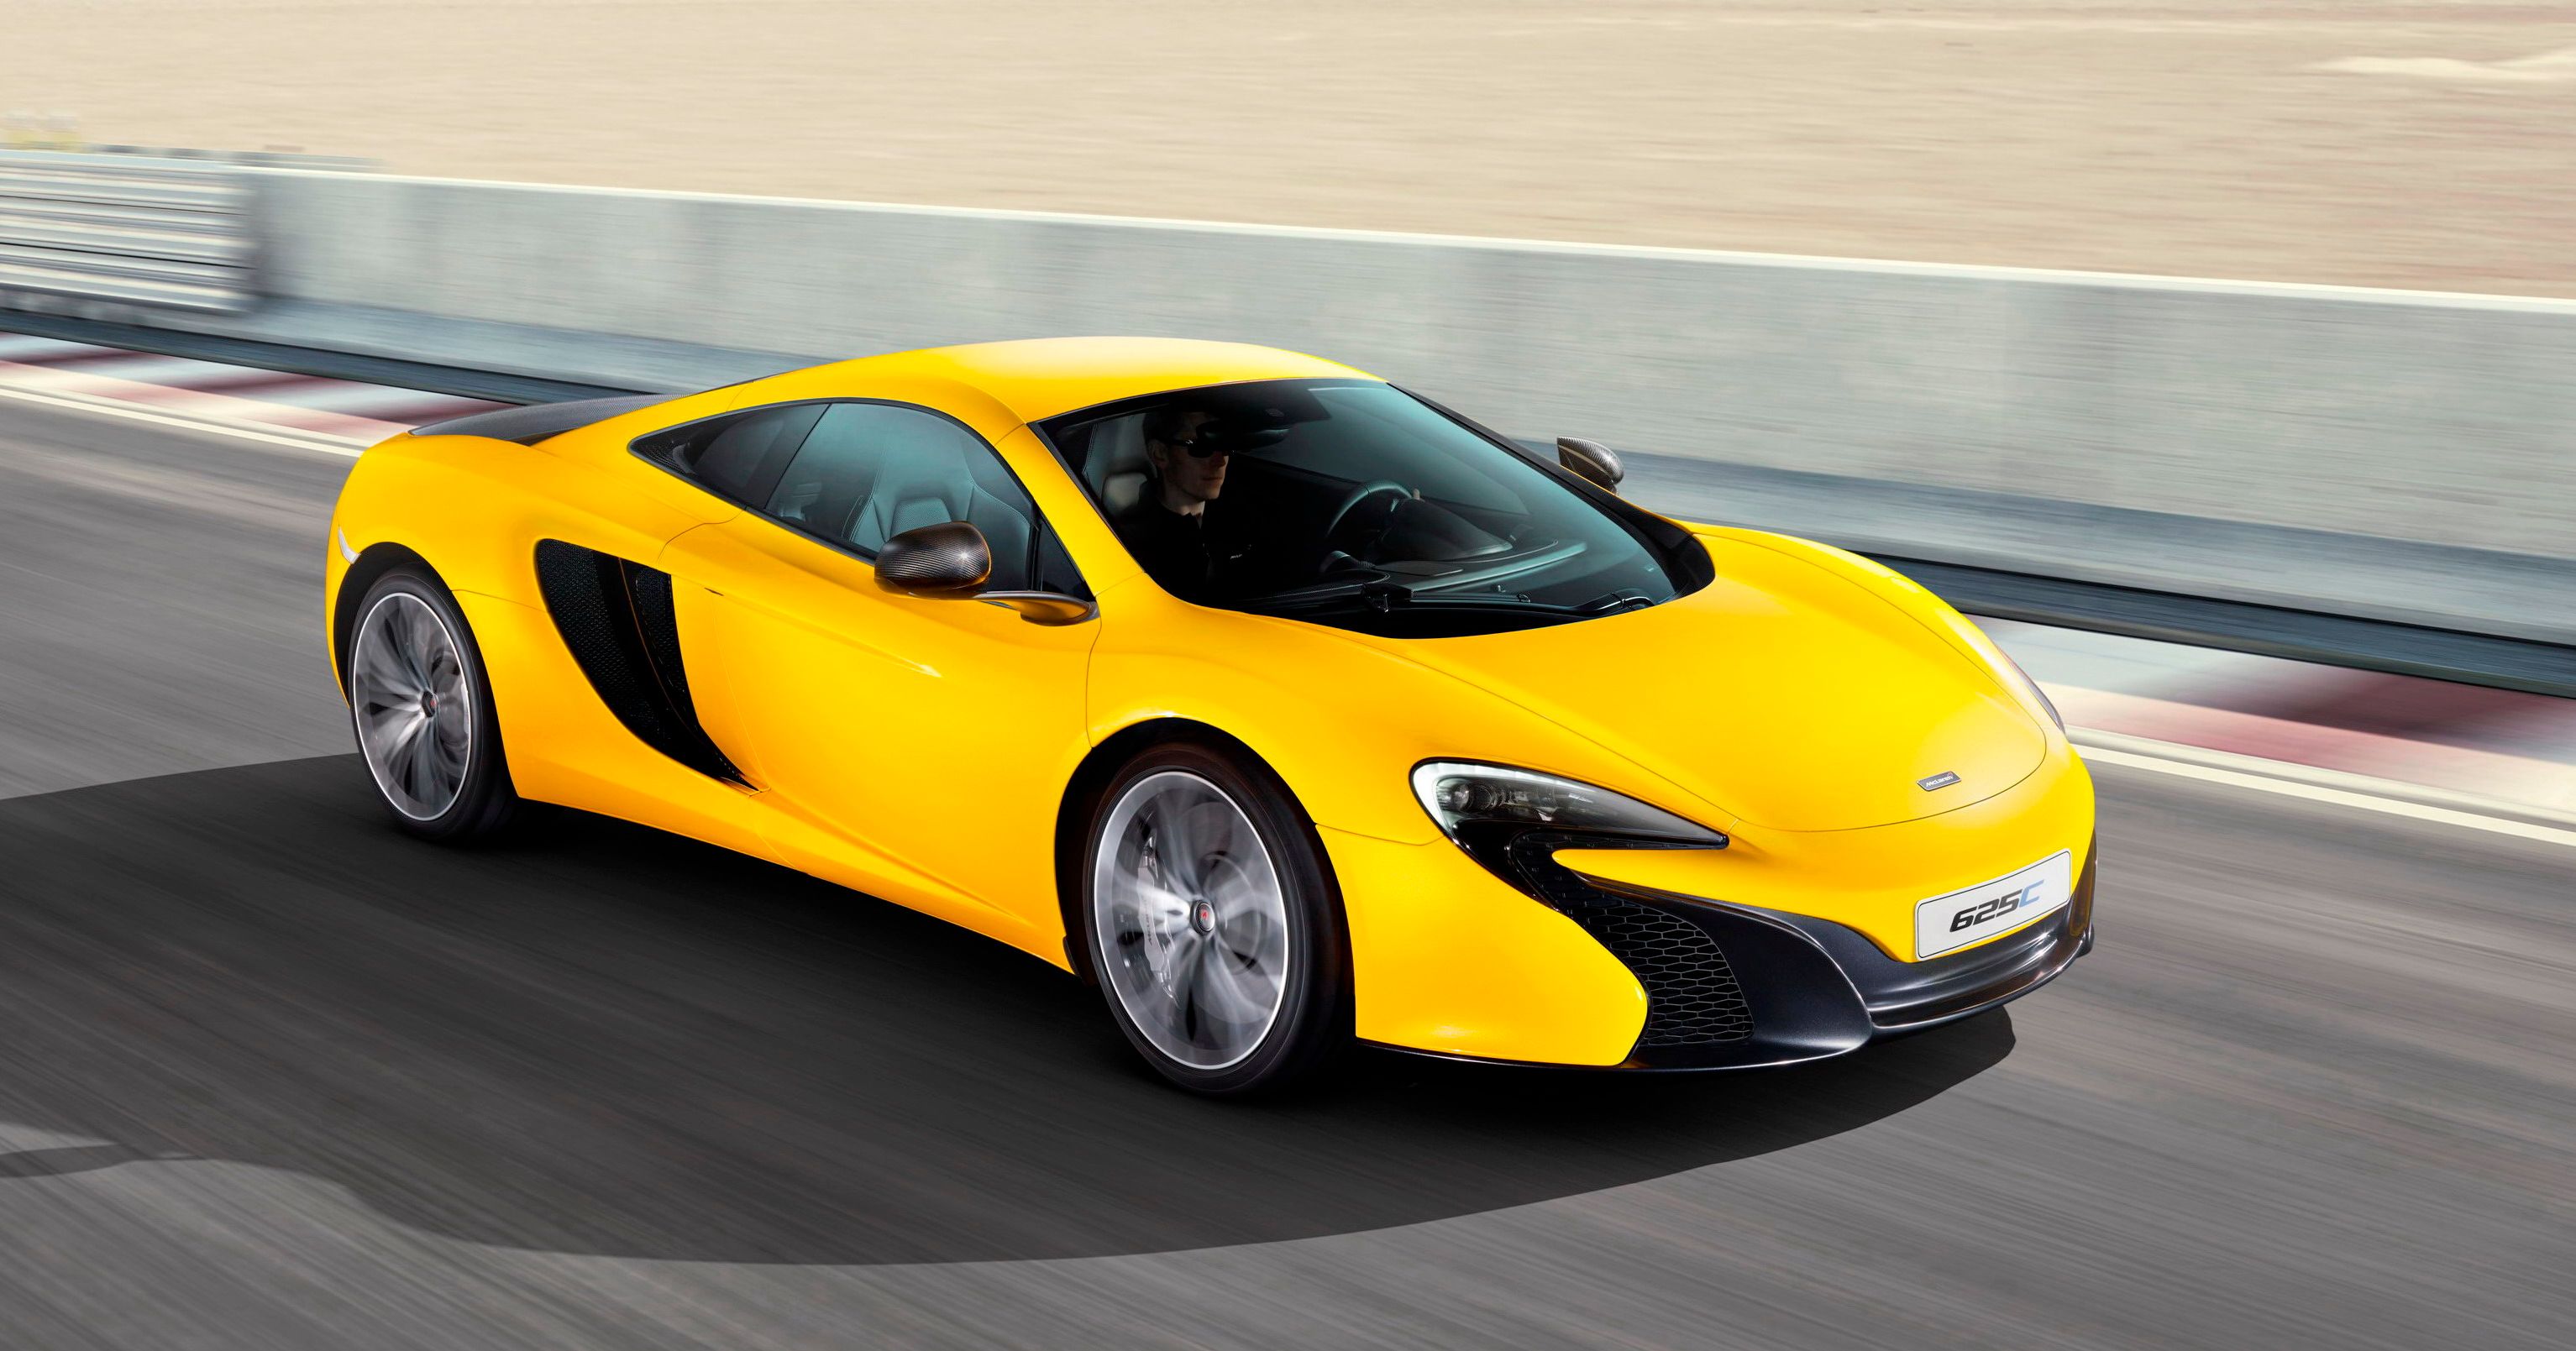  McLaren's heading to Asia with its 625C, which is little more than a detuned 650S. 